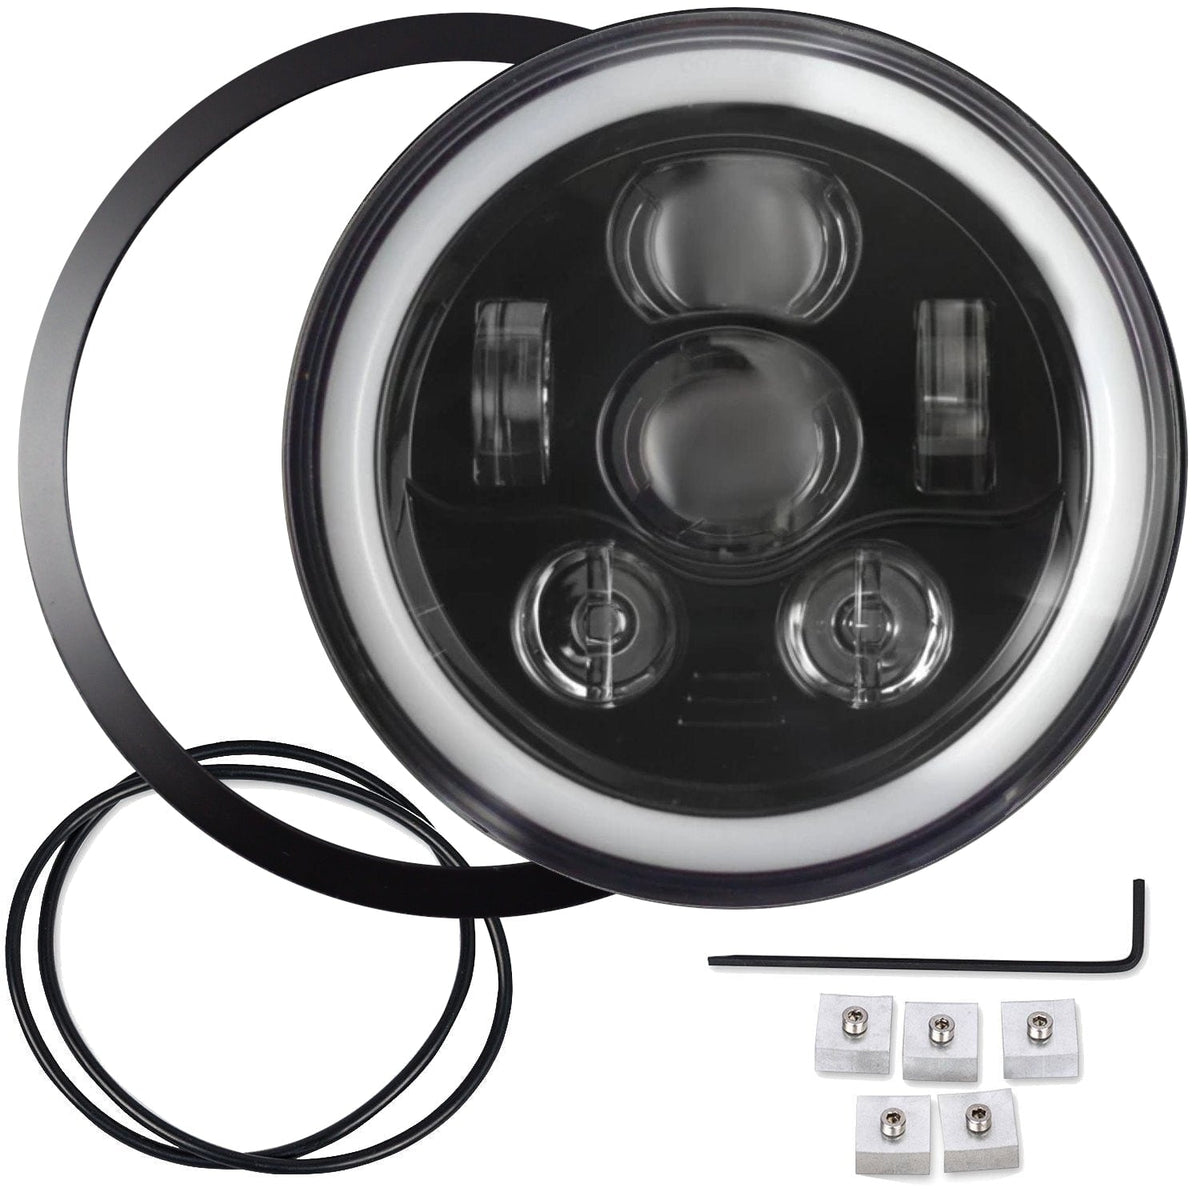 Eagle Lights 7" LED Headlight Kit for Triumph T100 and T120 Models